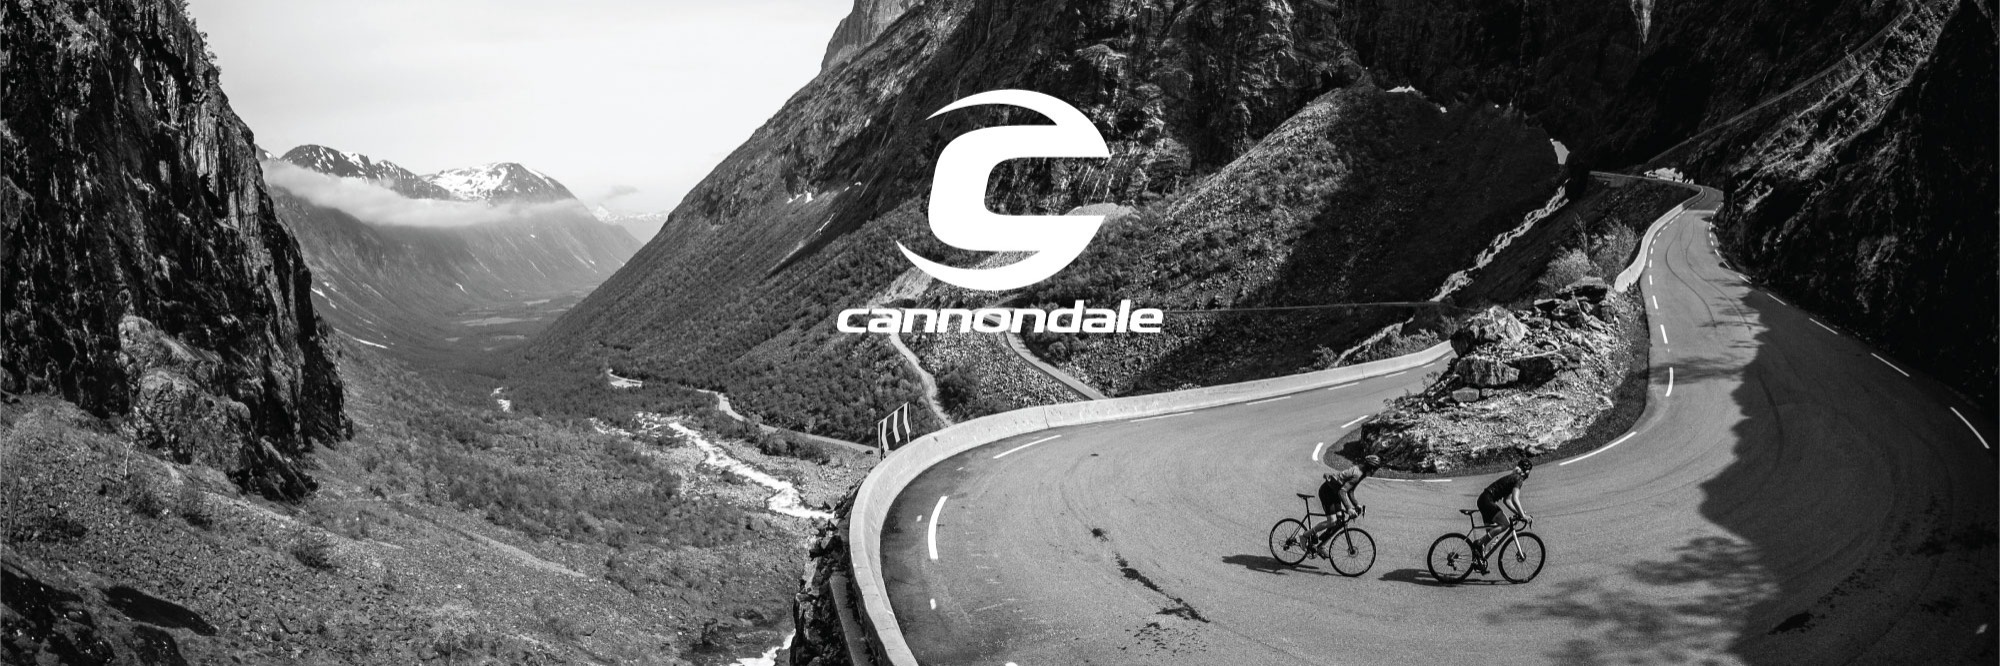 Cannondale Bikes Sold Here